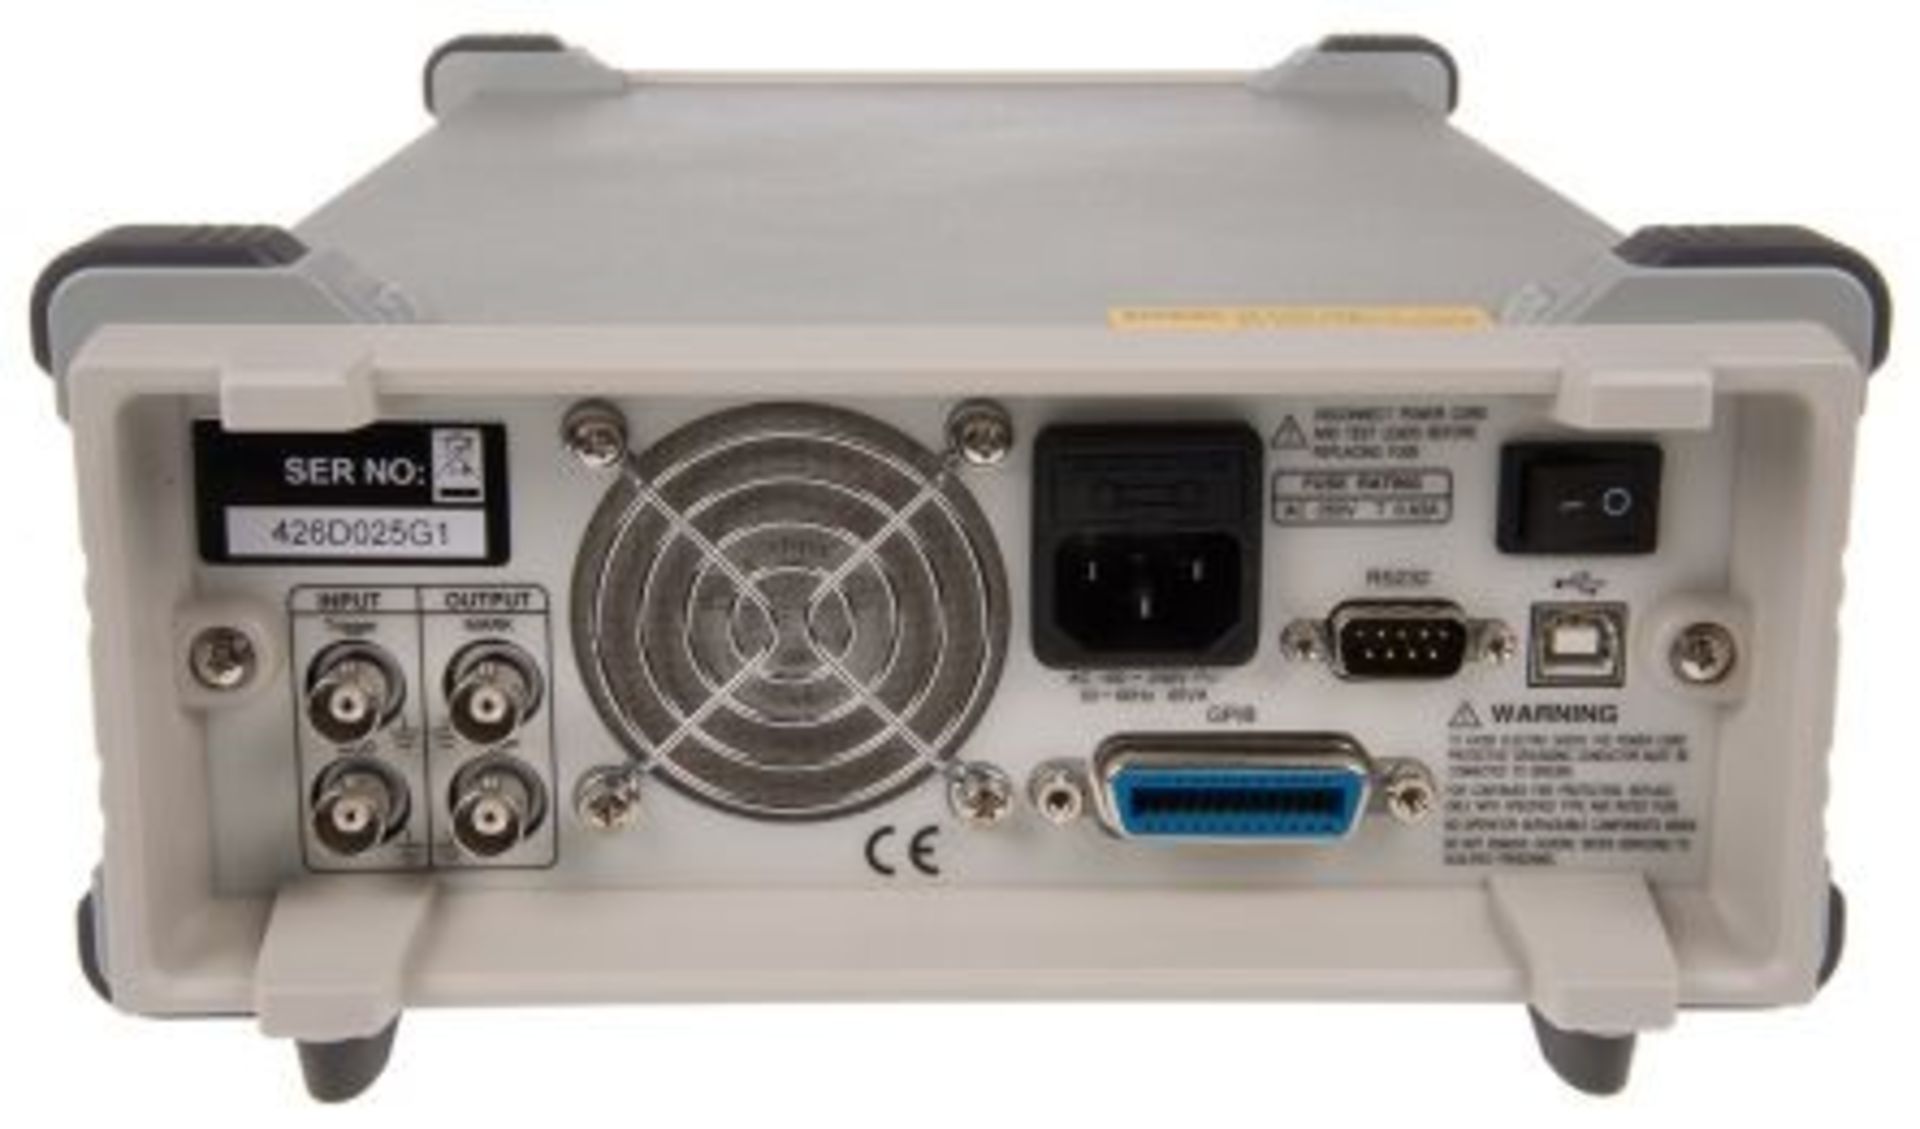 ISO-TECH AFG-31051 Function Generator 50MHz - Image 3 of 3